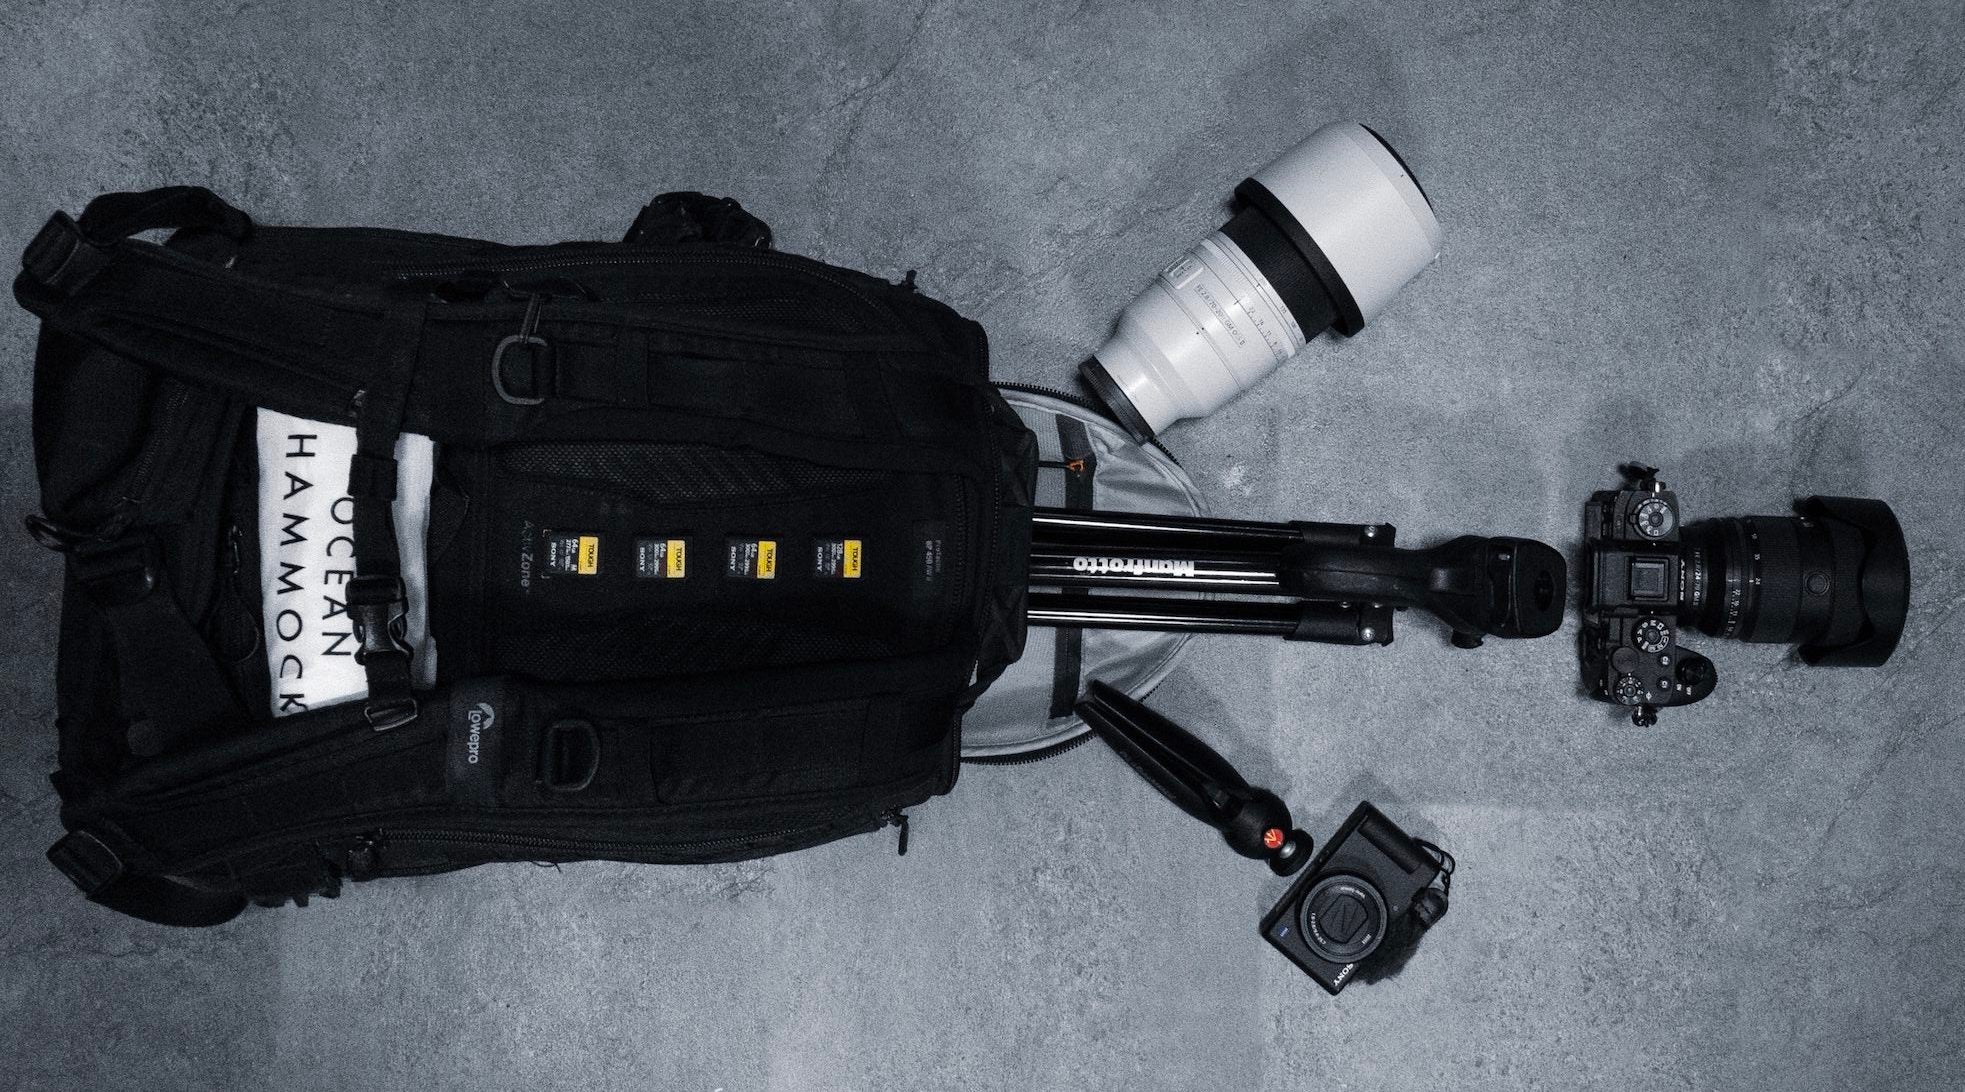 Anthony Castro's kit for travel photo and video